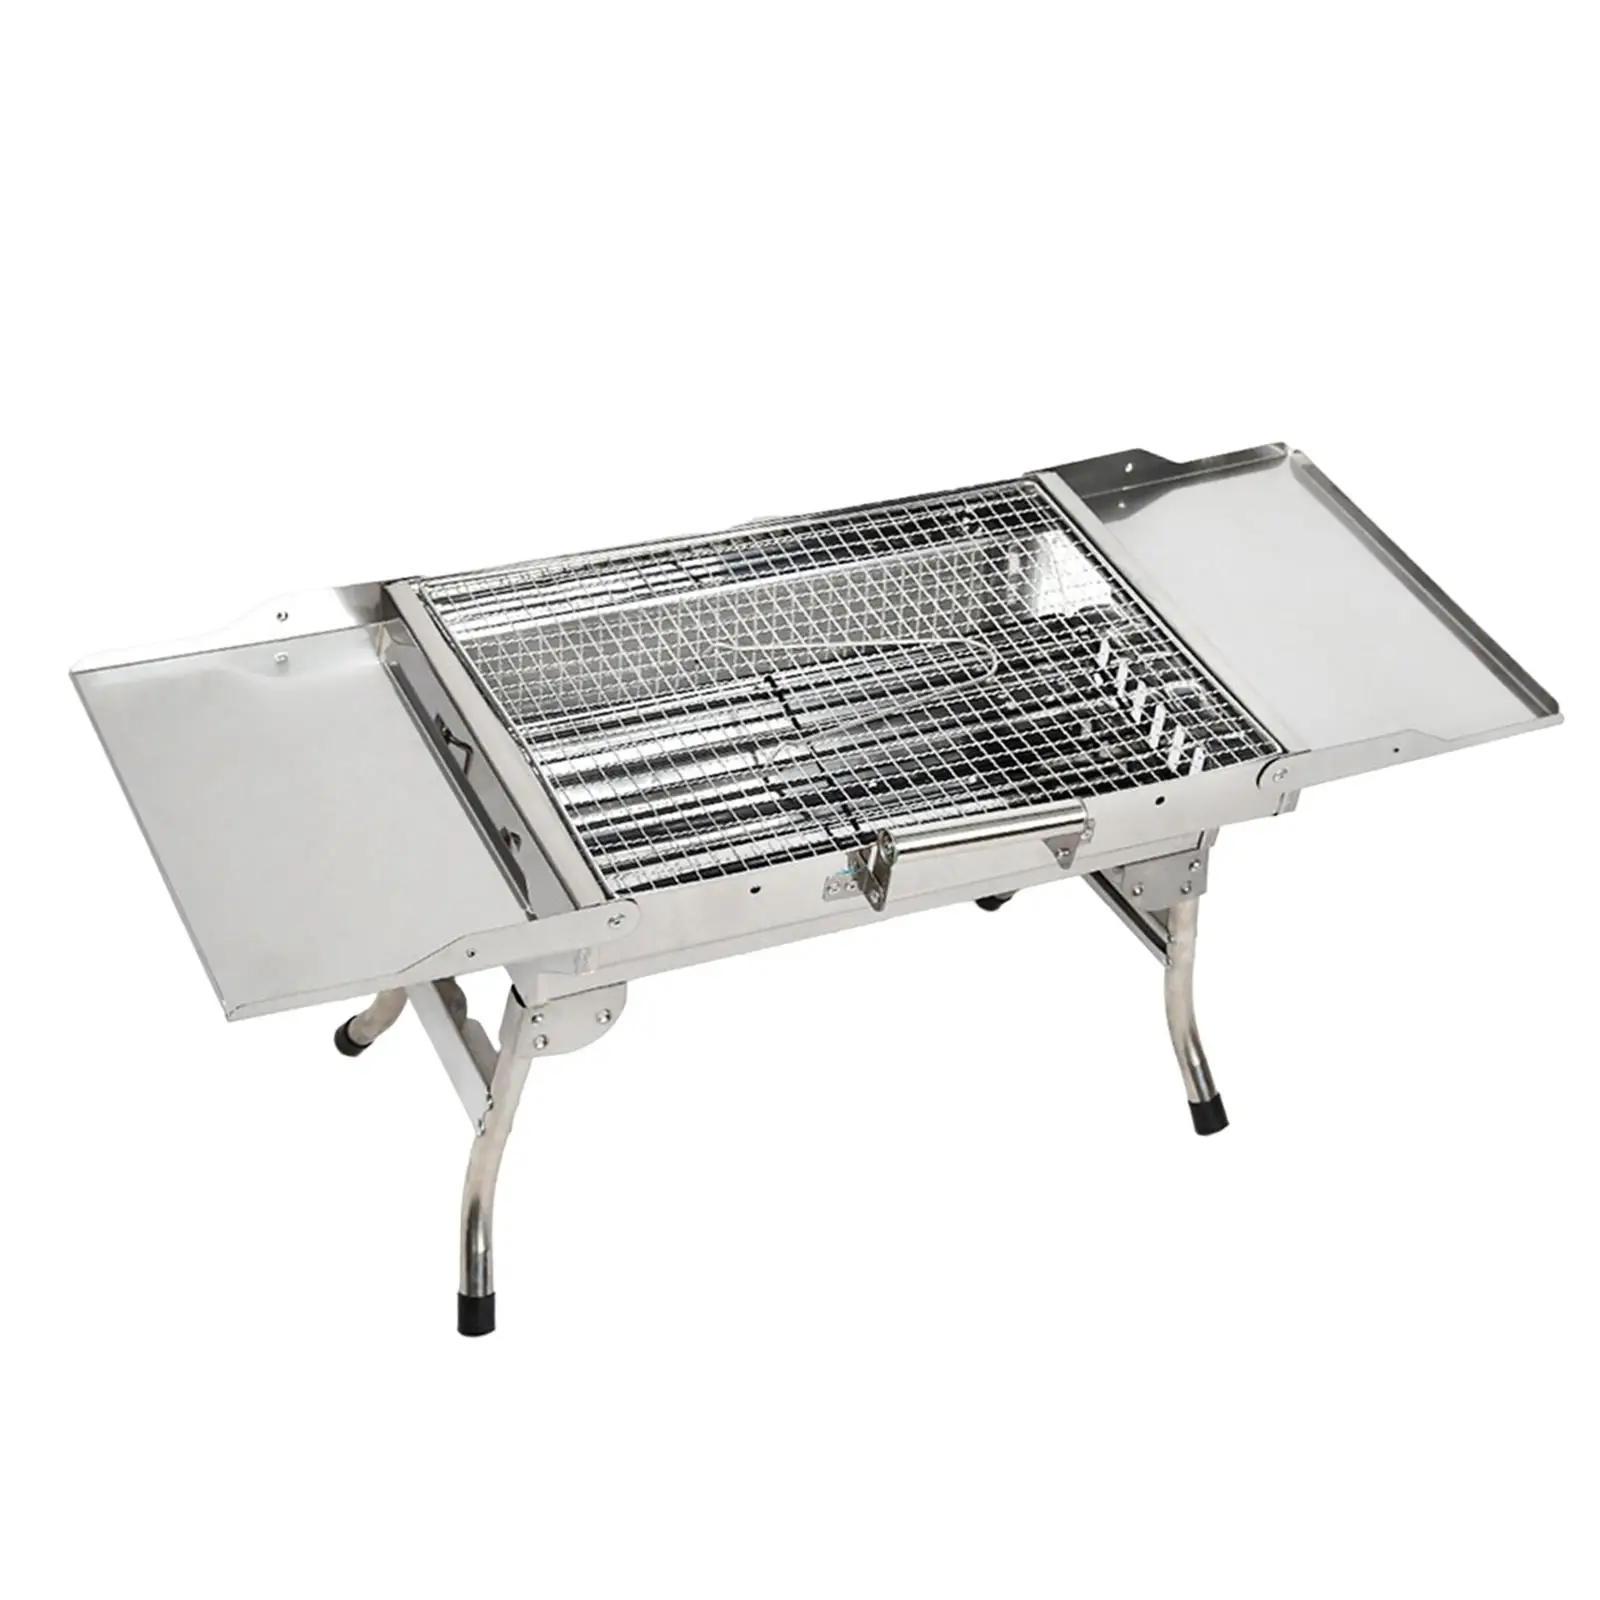 Portable Barbecue  Grill Compact Desk Tabletop Stainless Steel BBQ   Grill Tool